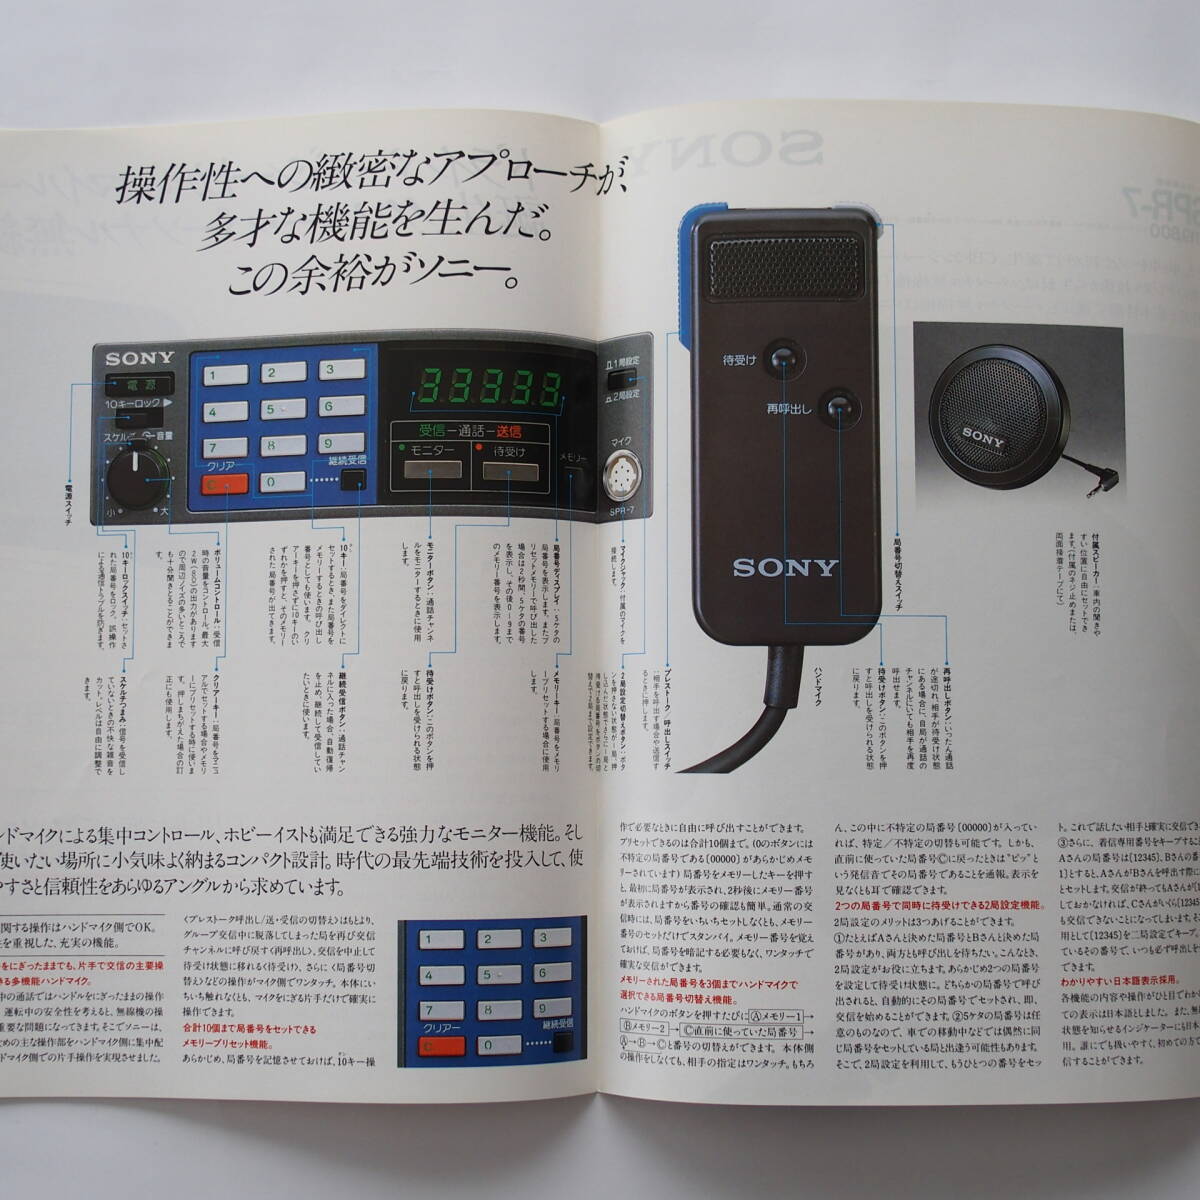 [ catalog ][SONY personal transceiver SPR-7 catalog ](1983 year 4 month )